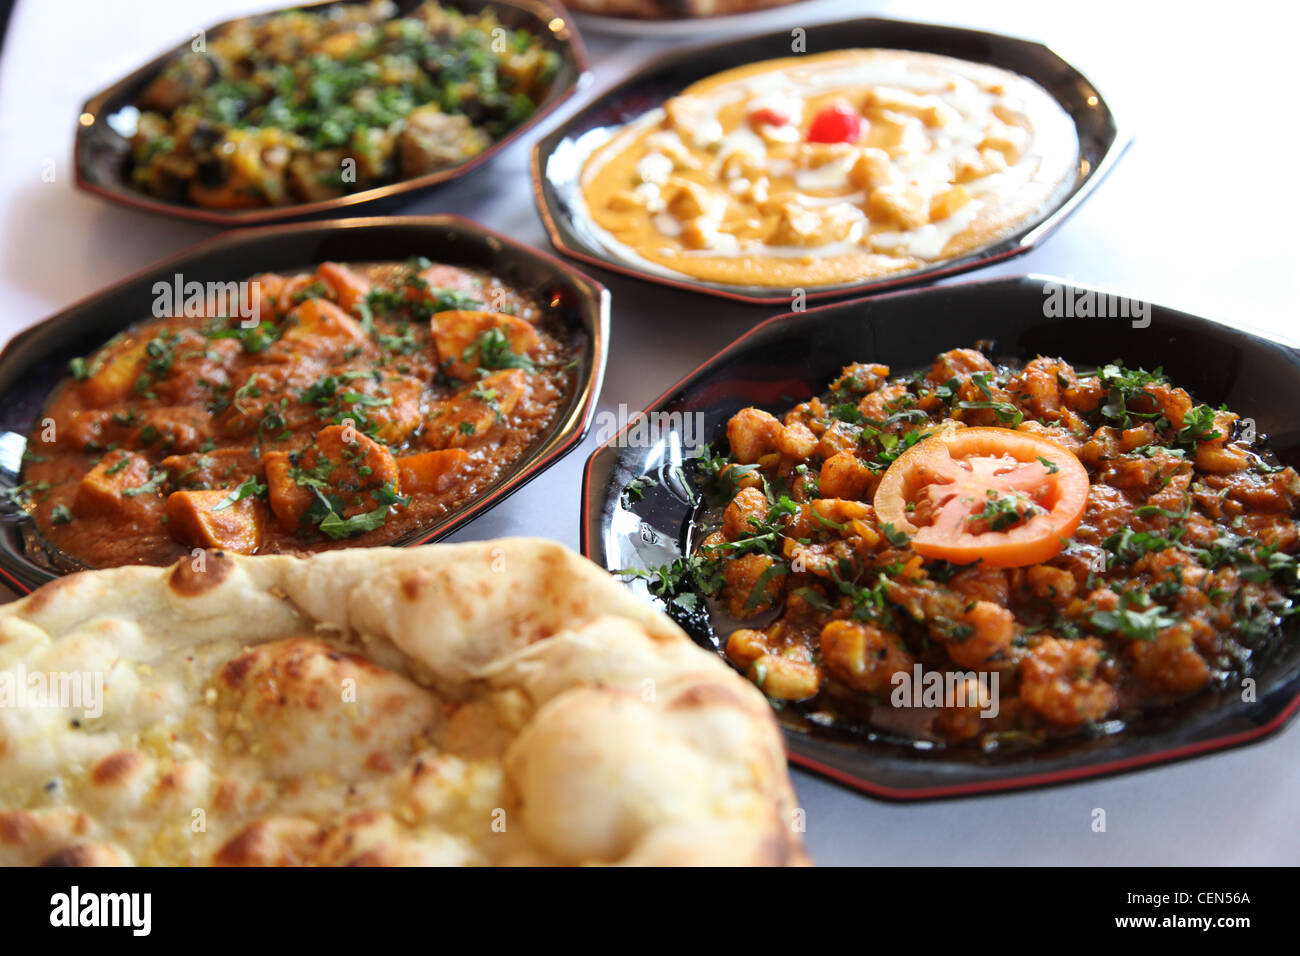 Dishes freshly prepared at an Indian restaurant in England Stock Photo